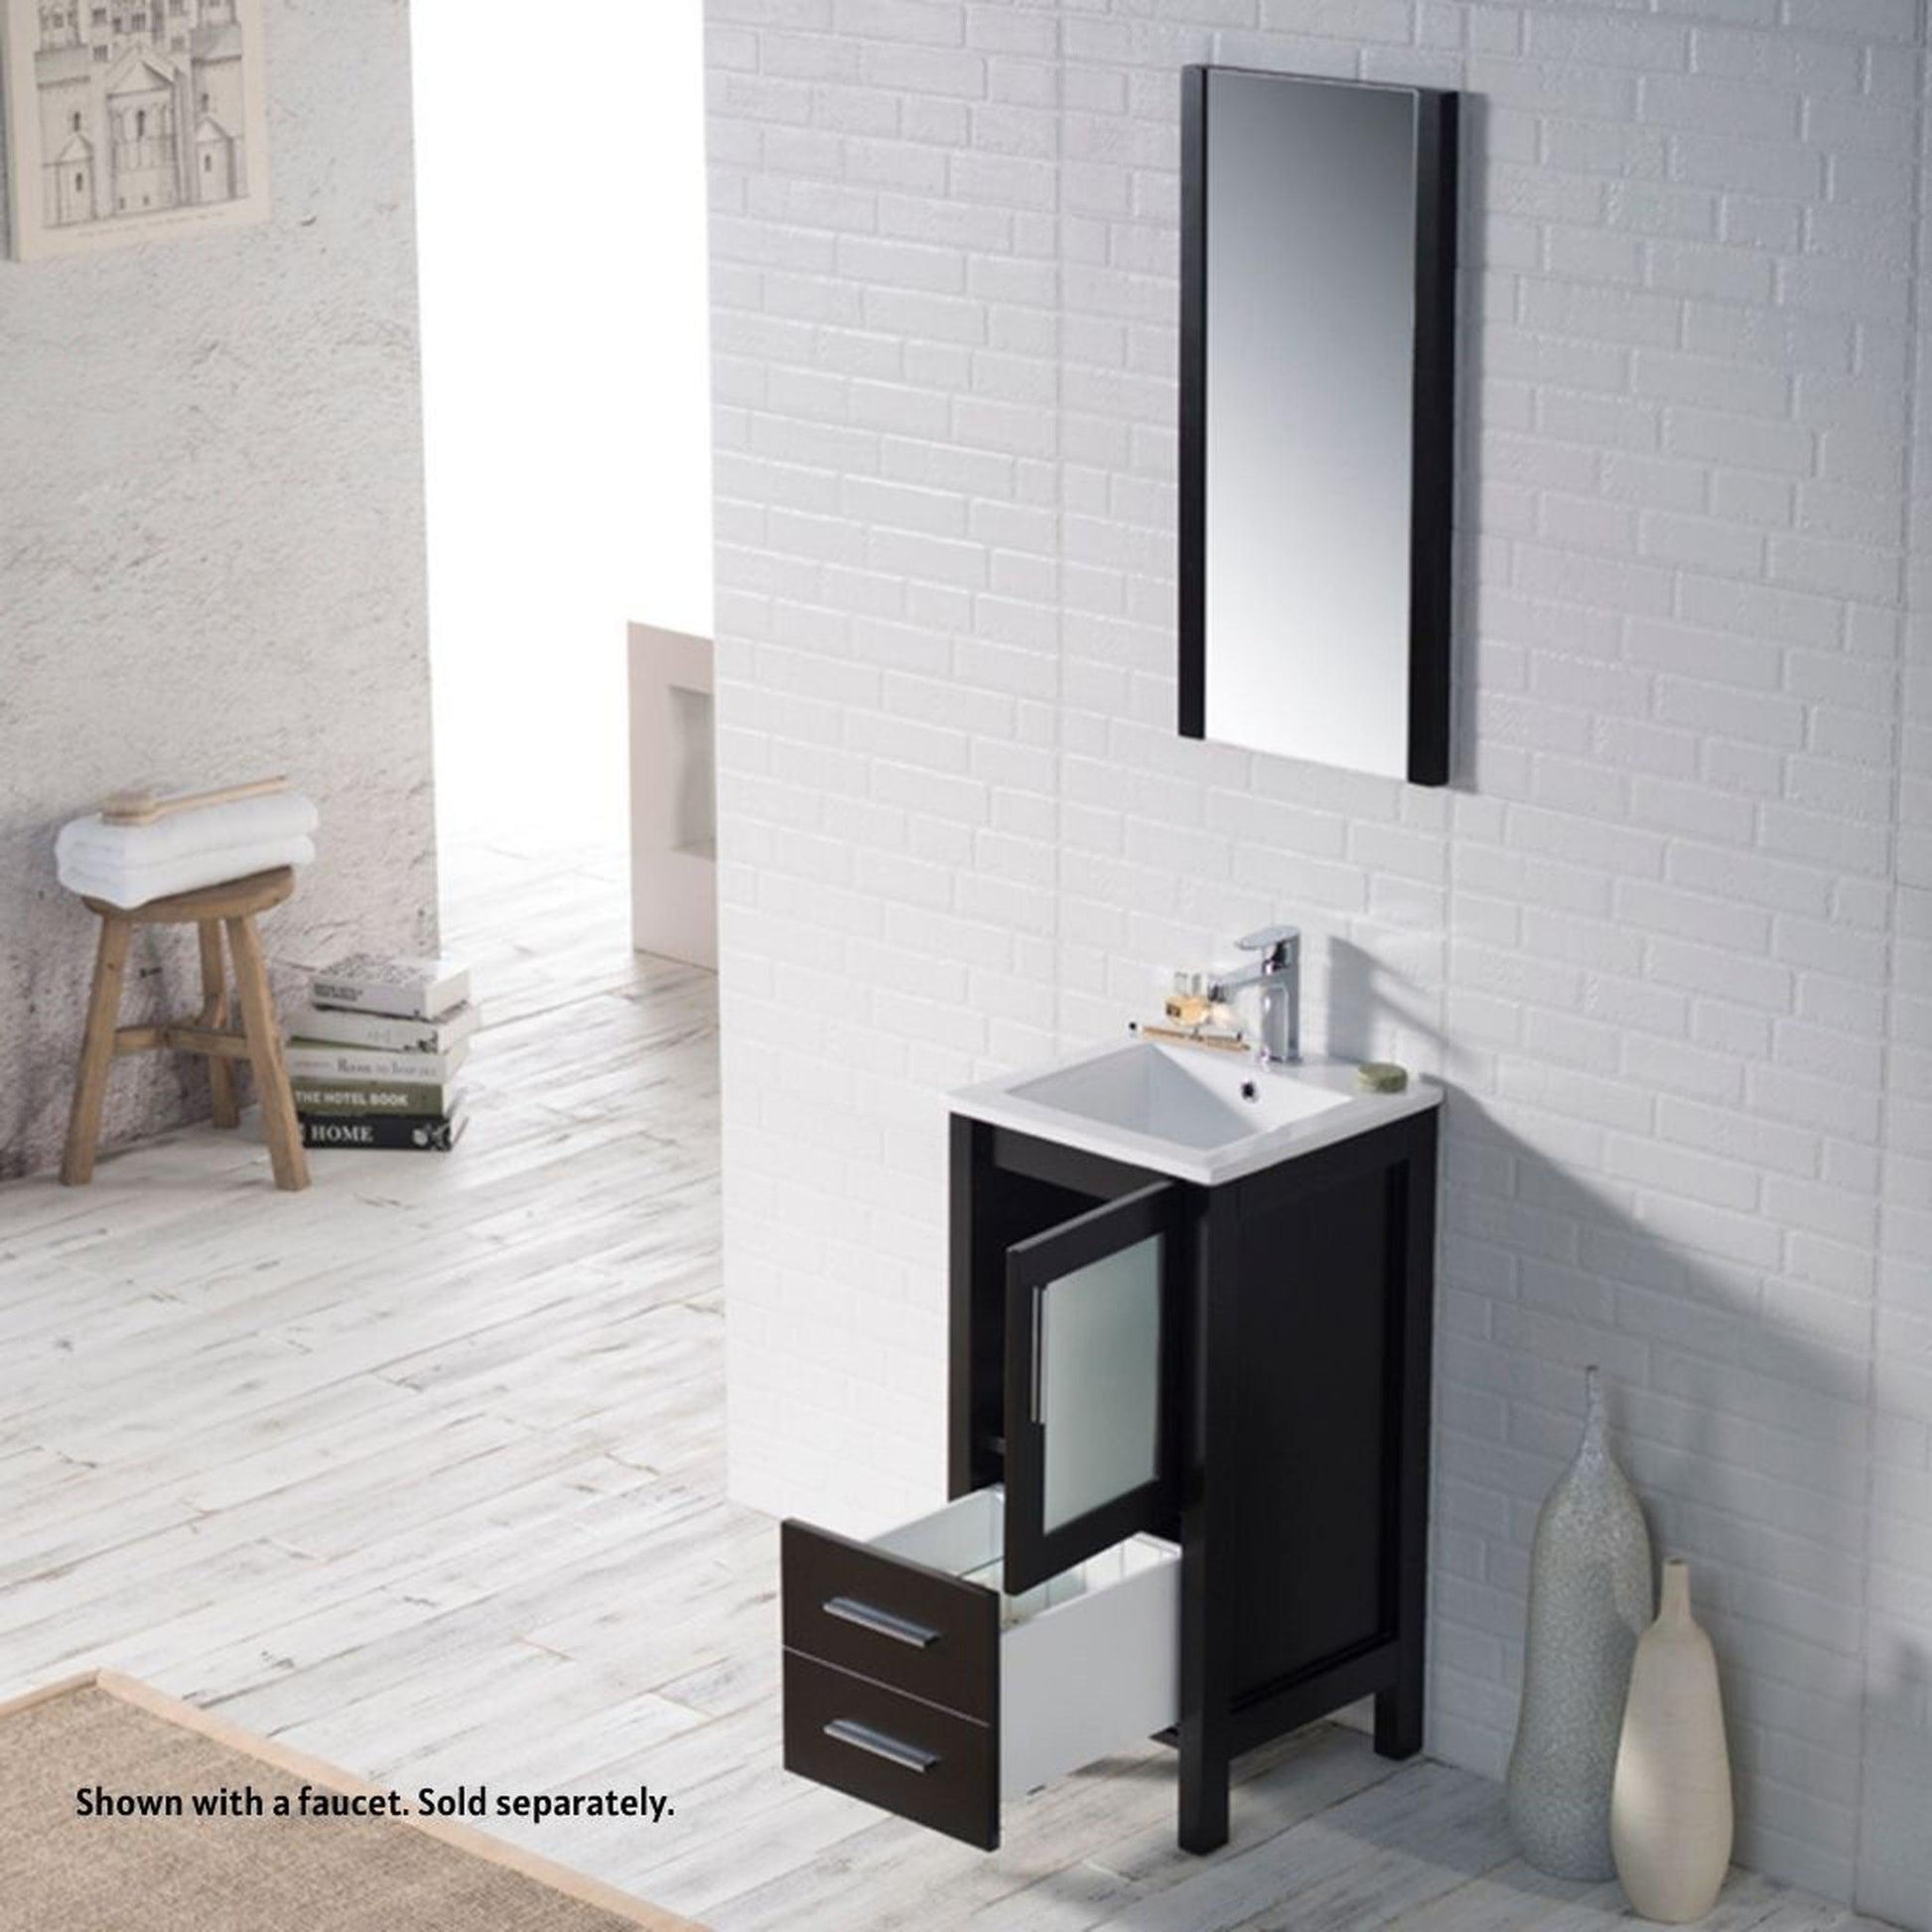 Blossom Sydney 16" Espresso Freestanding Vanity Set With Integrated Single Sink Ceramic Top and Mirror